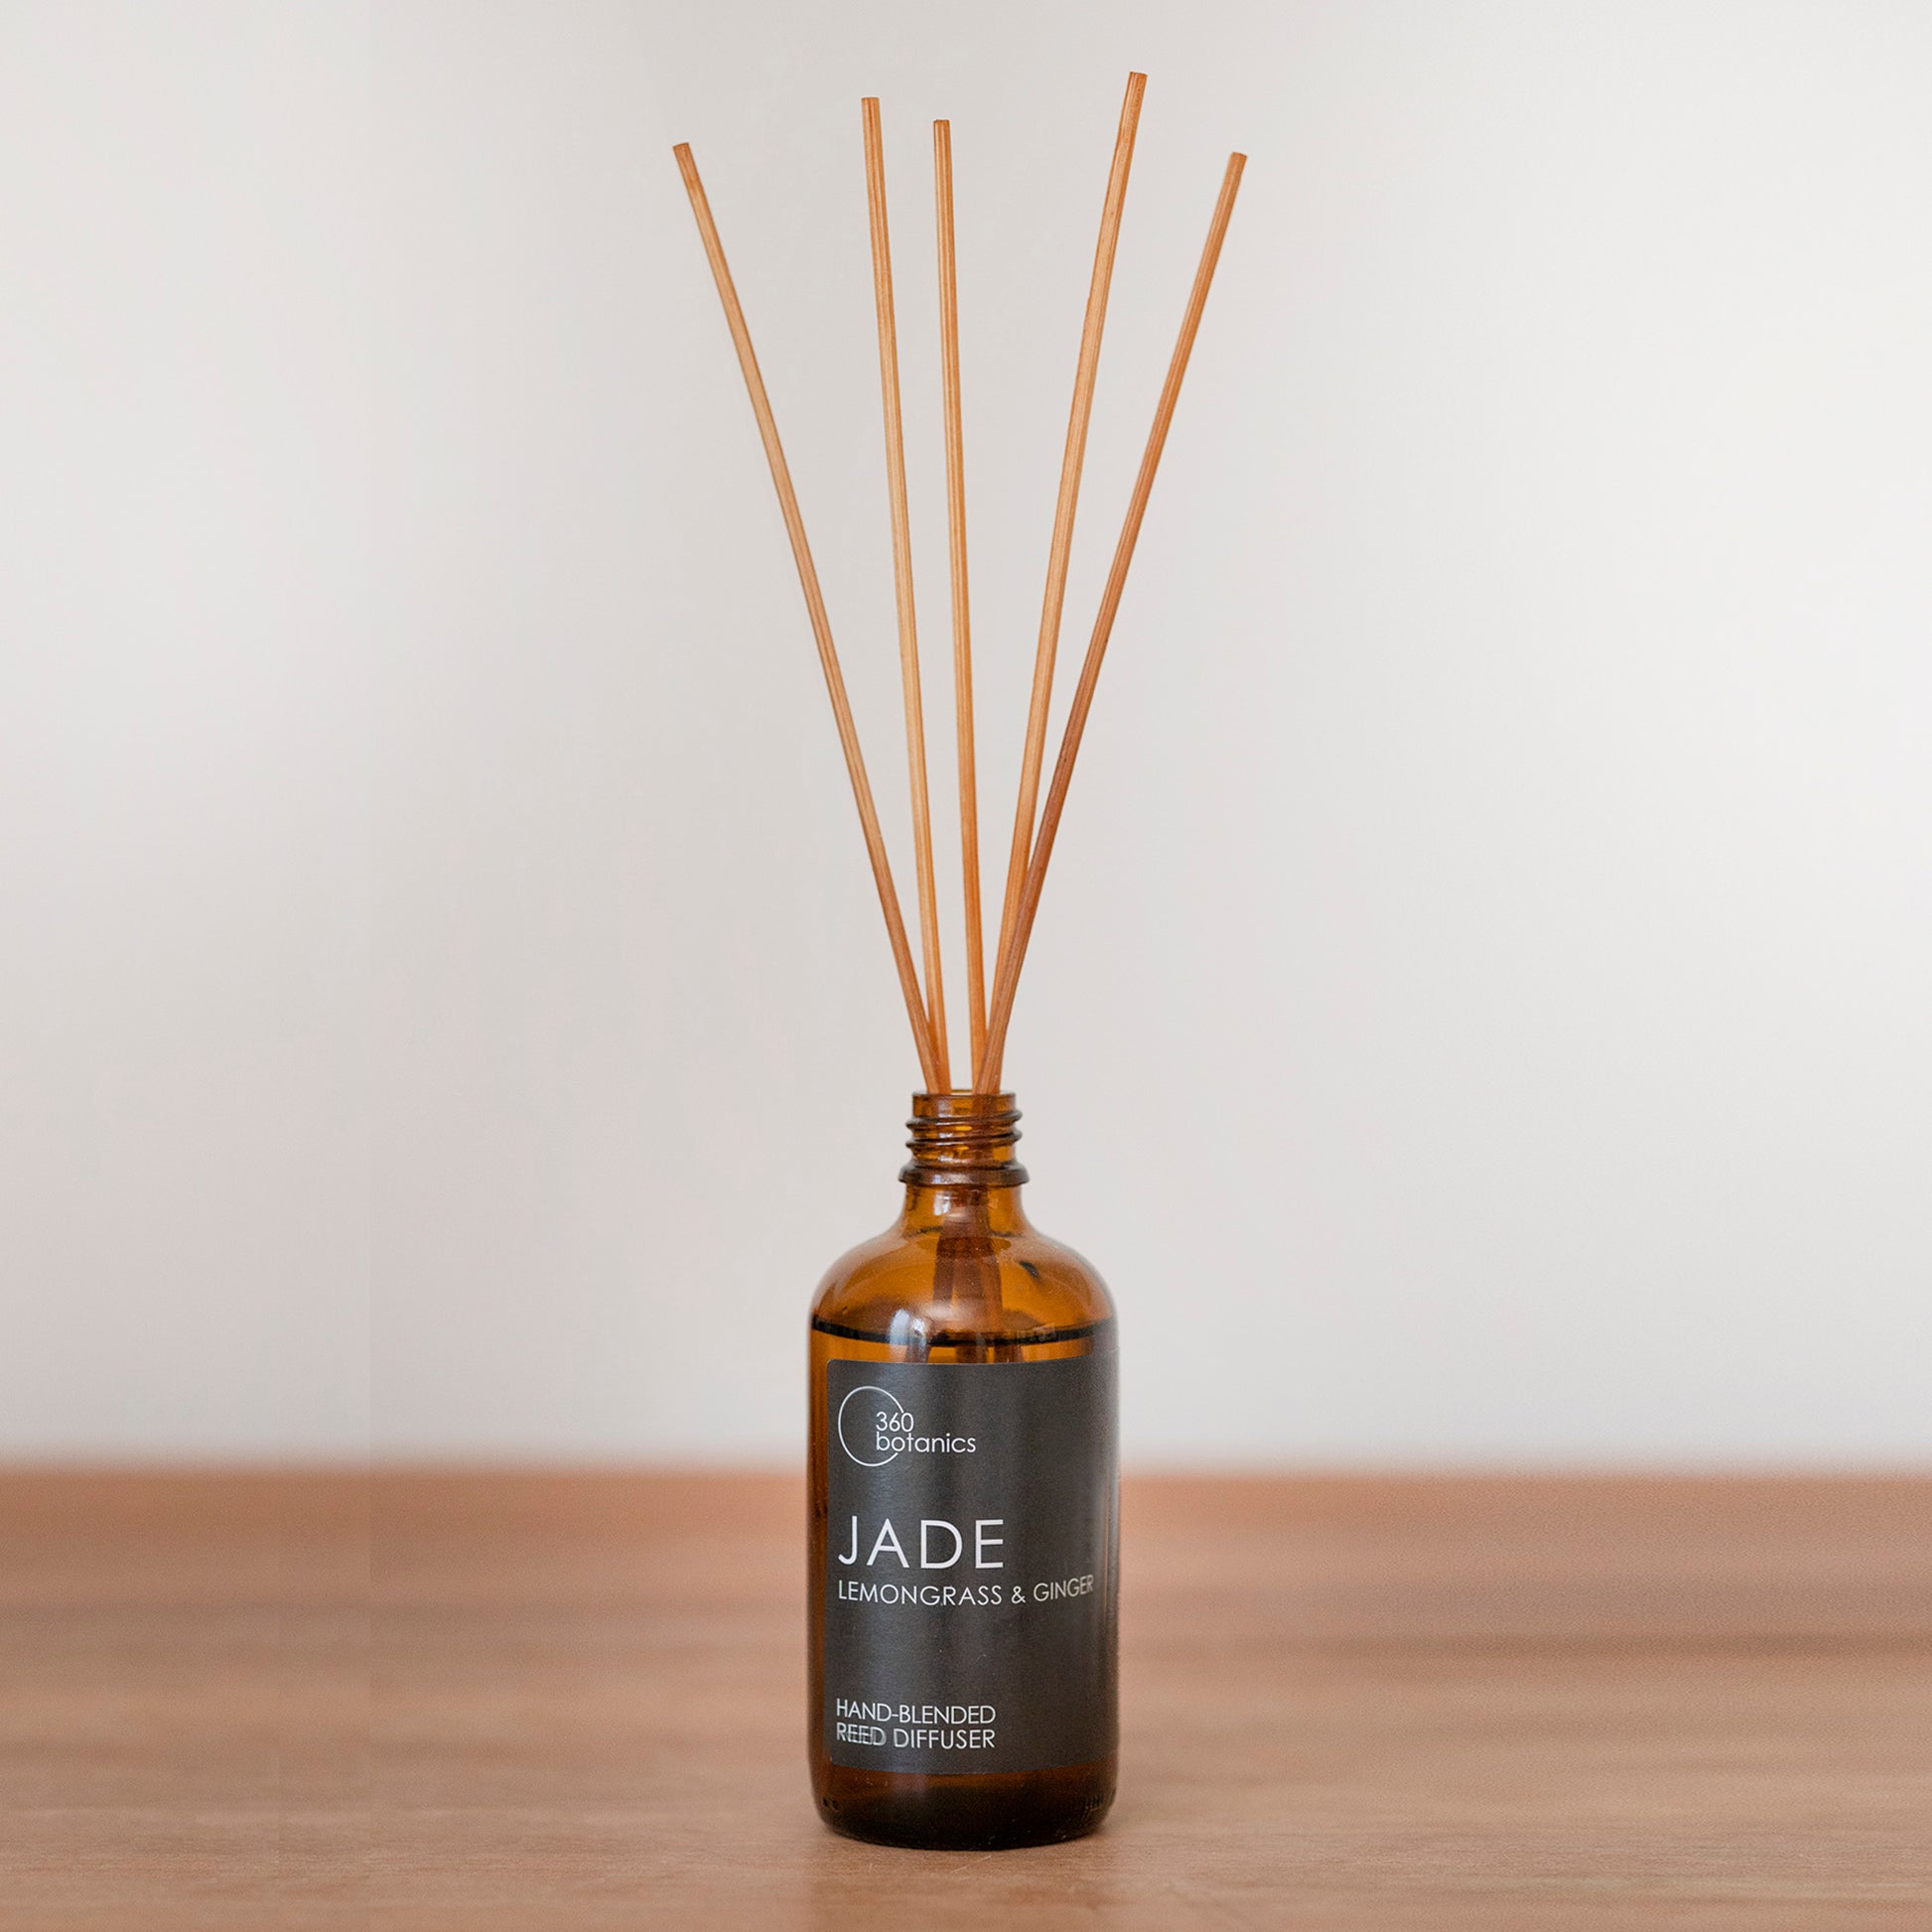 360 Botanics Jade reed diffuser with a lemongrass and ginger scent in a brown glass bottle. Several light brown reeds extend upwards, distributing the fragrance. It's presented on a wooden surface against a neutral background, symbolizing the fresh and invigorating essence of the product